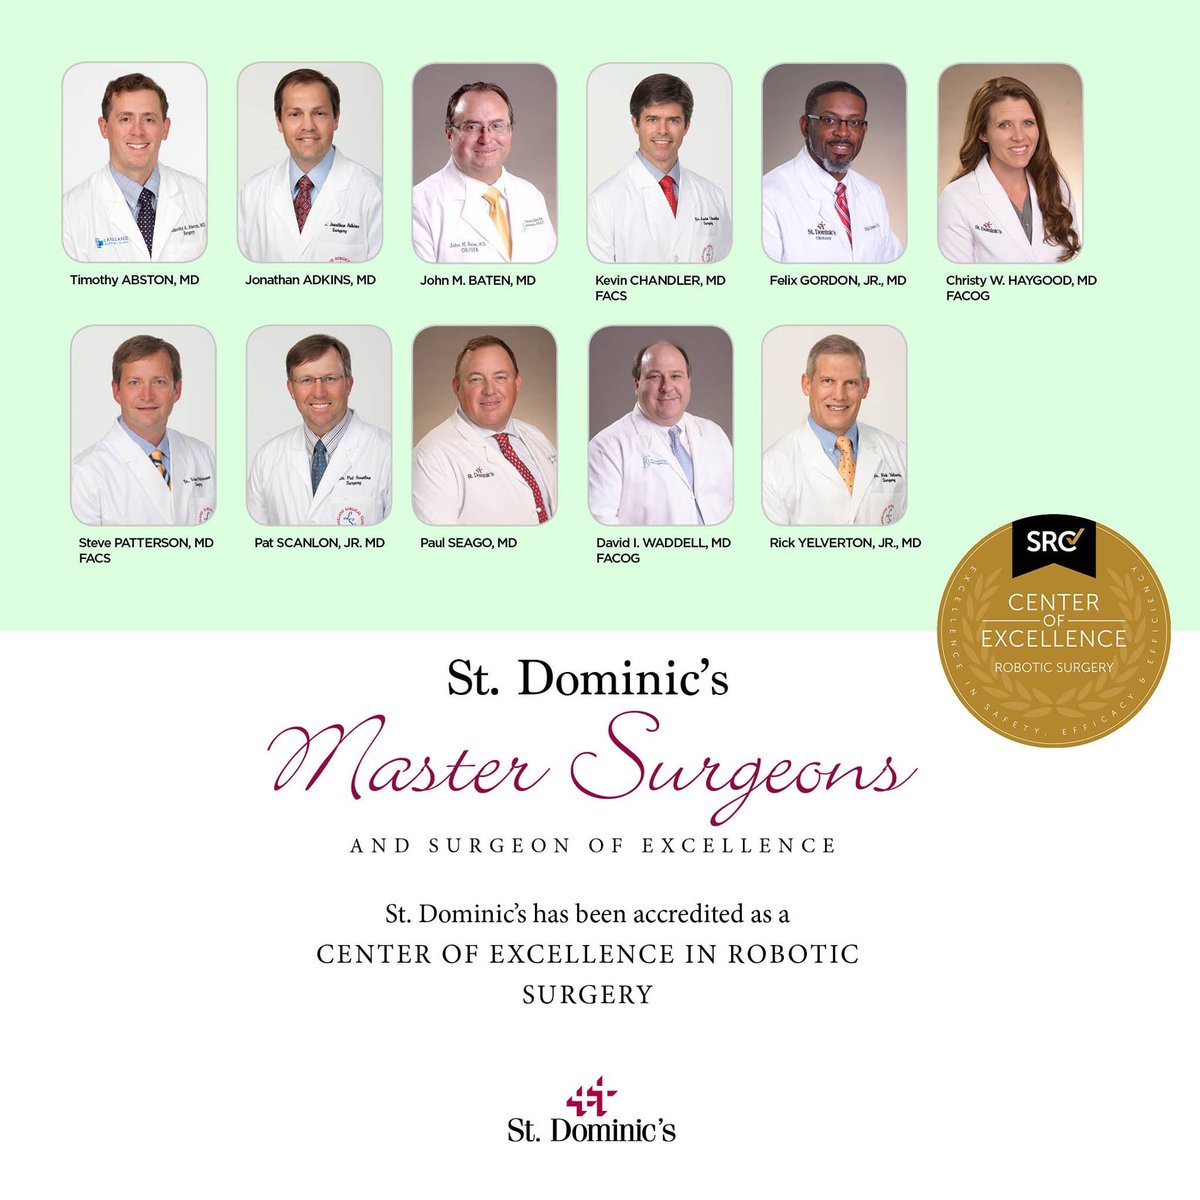 Congratulations , St. Dominic Hospital!

St. Dominic's has been accredited as a Center of Excellence in Robotic Surgery. #SkilledHands #CompassionateHearts bit.ly/2X8eFwq